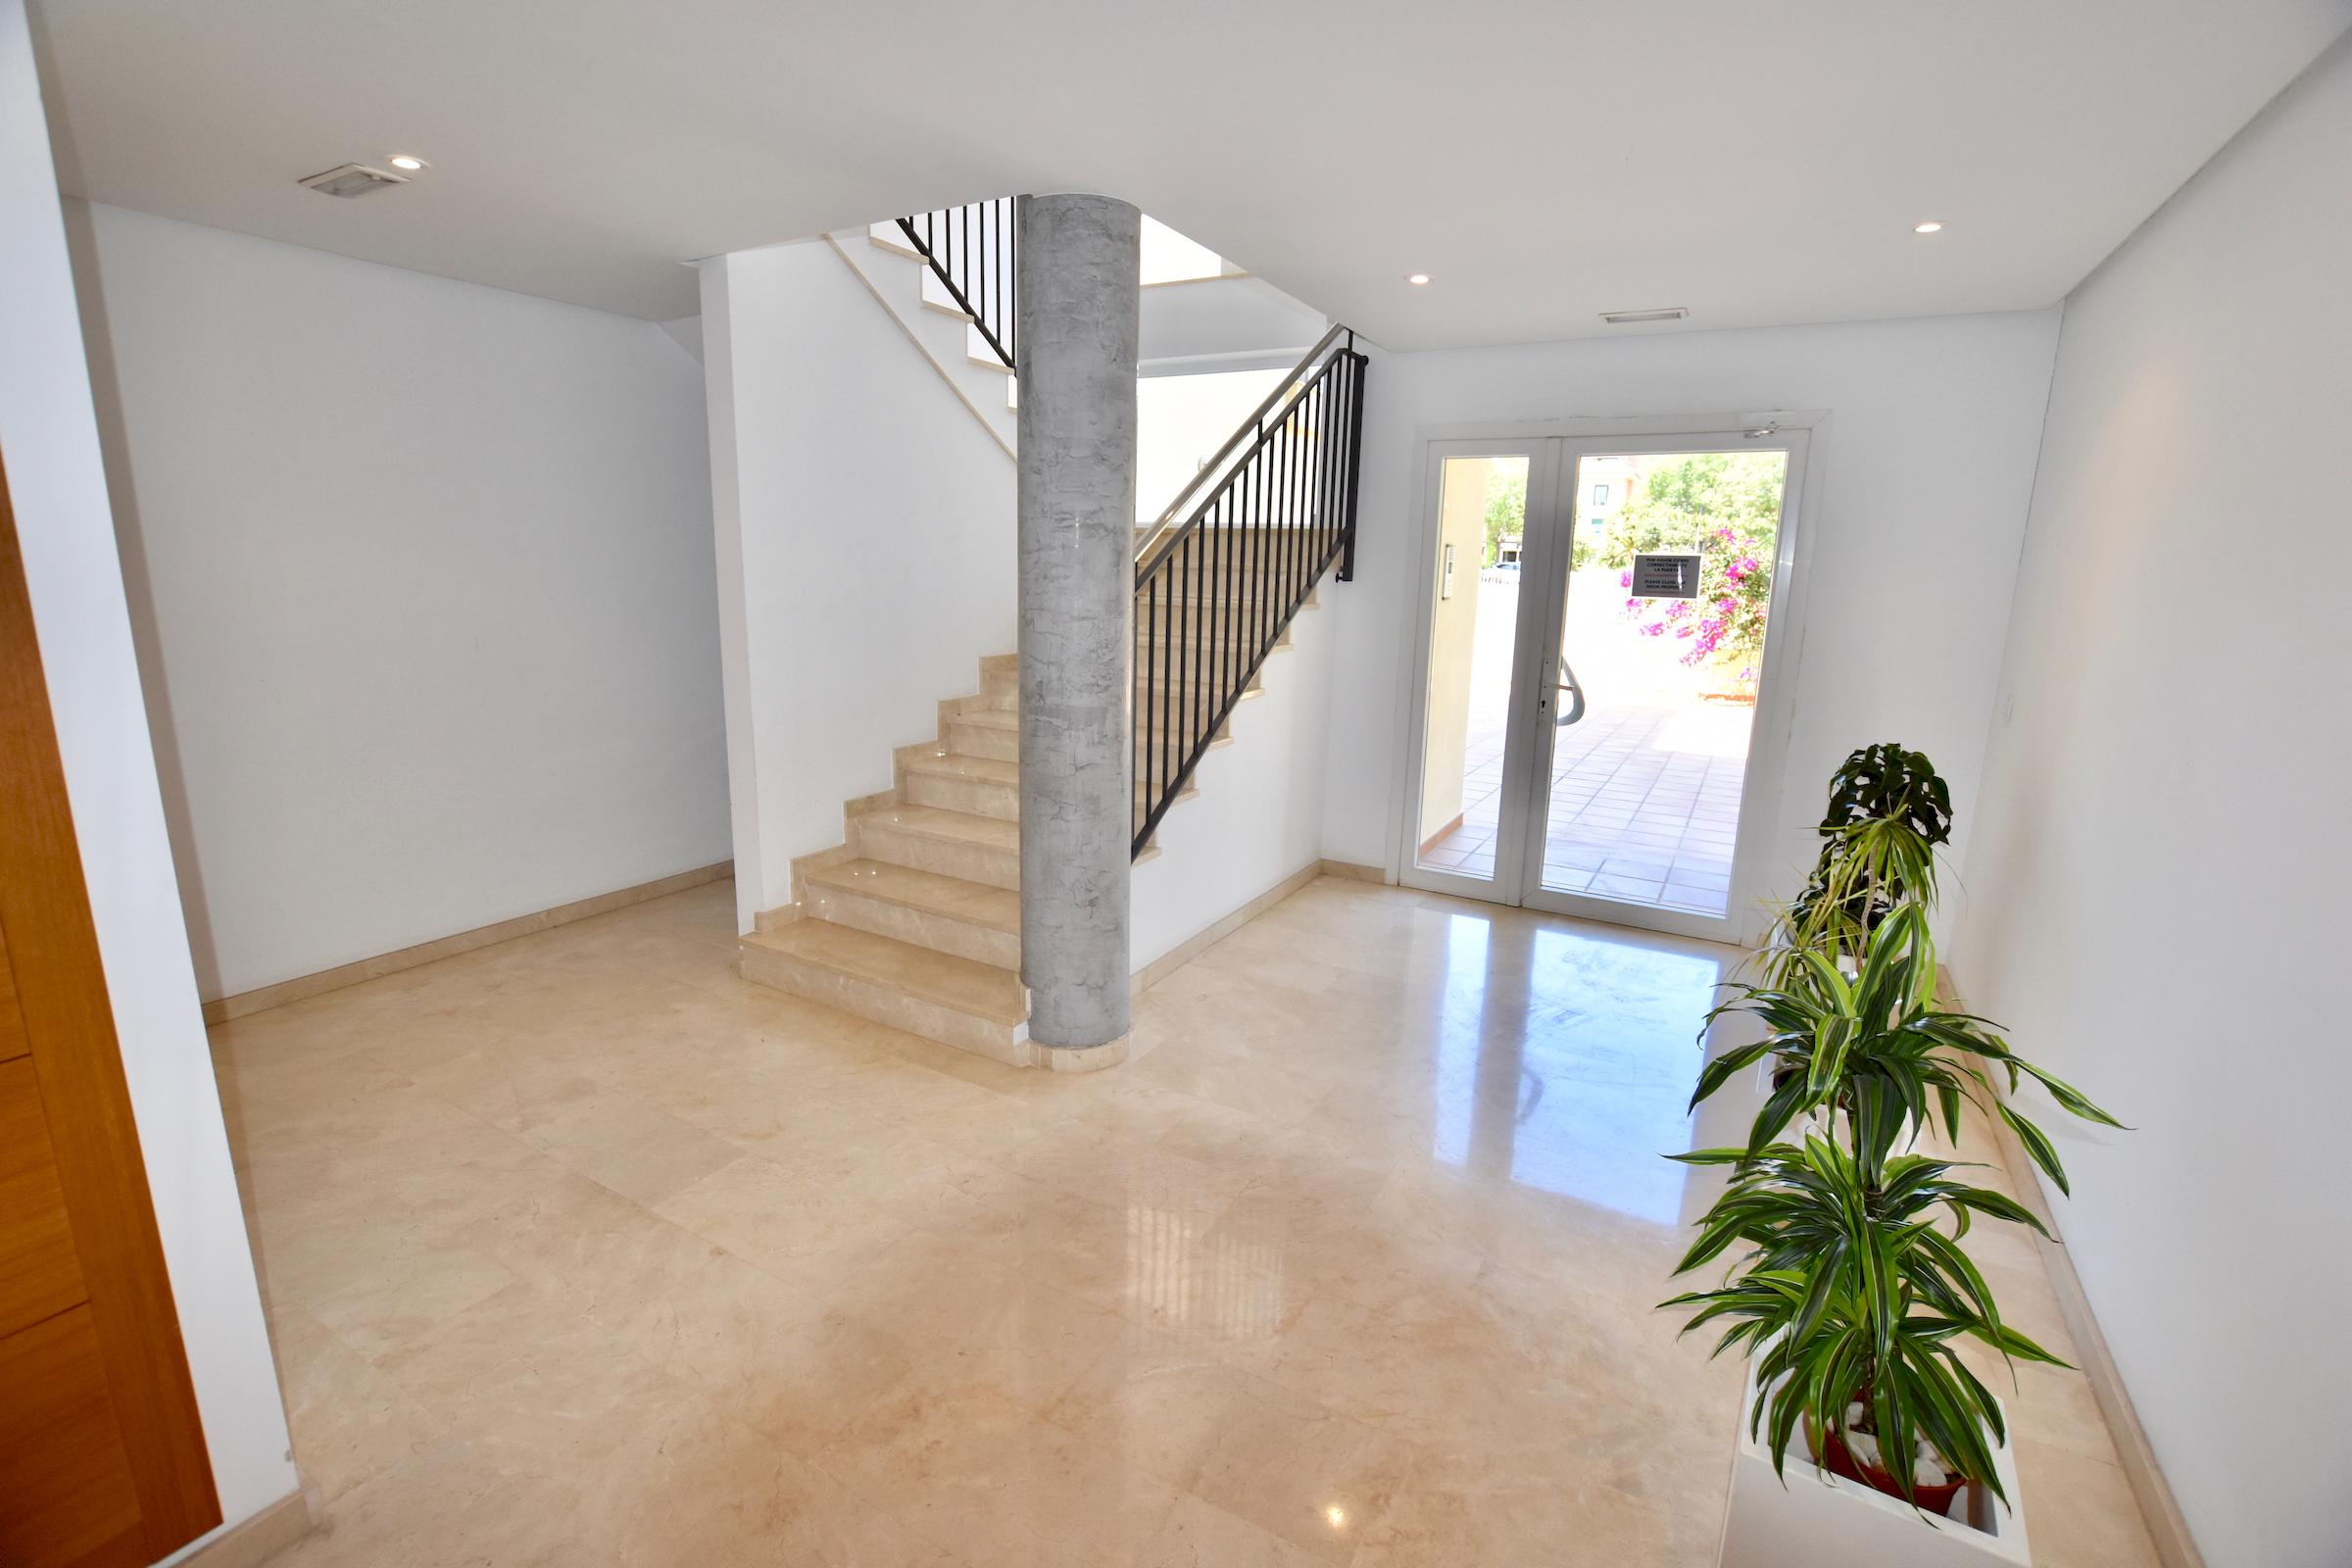 LIGHT AND SPACIOUS APARTMENT FOR EXCELLENT REST IN JAVEA, ALICANTE, COSTA BLANCA